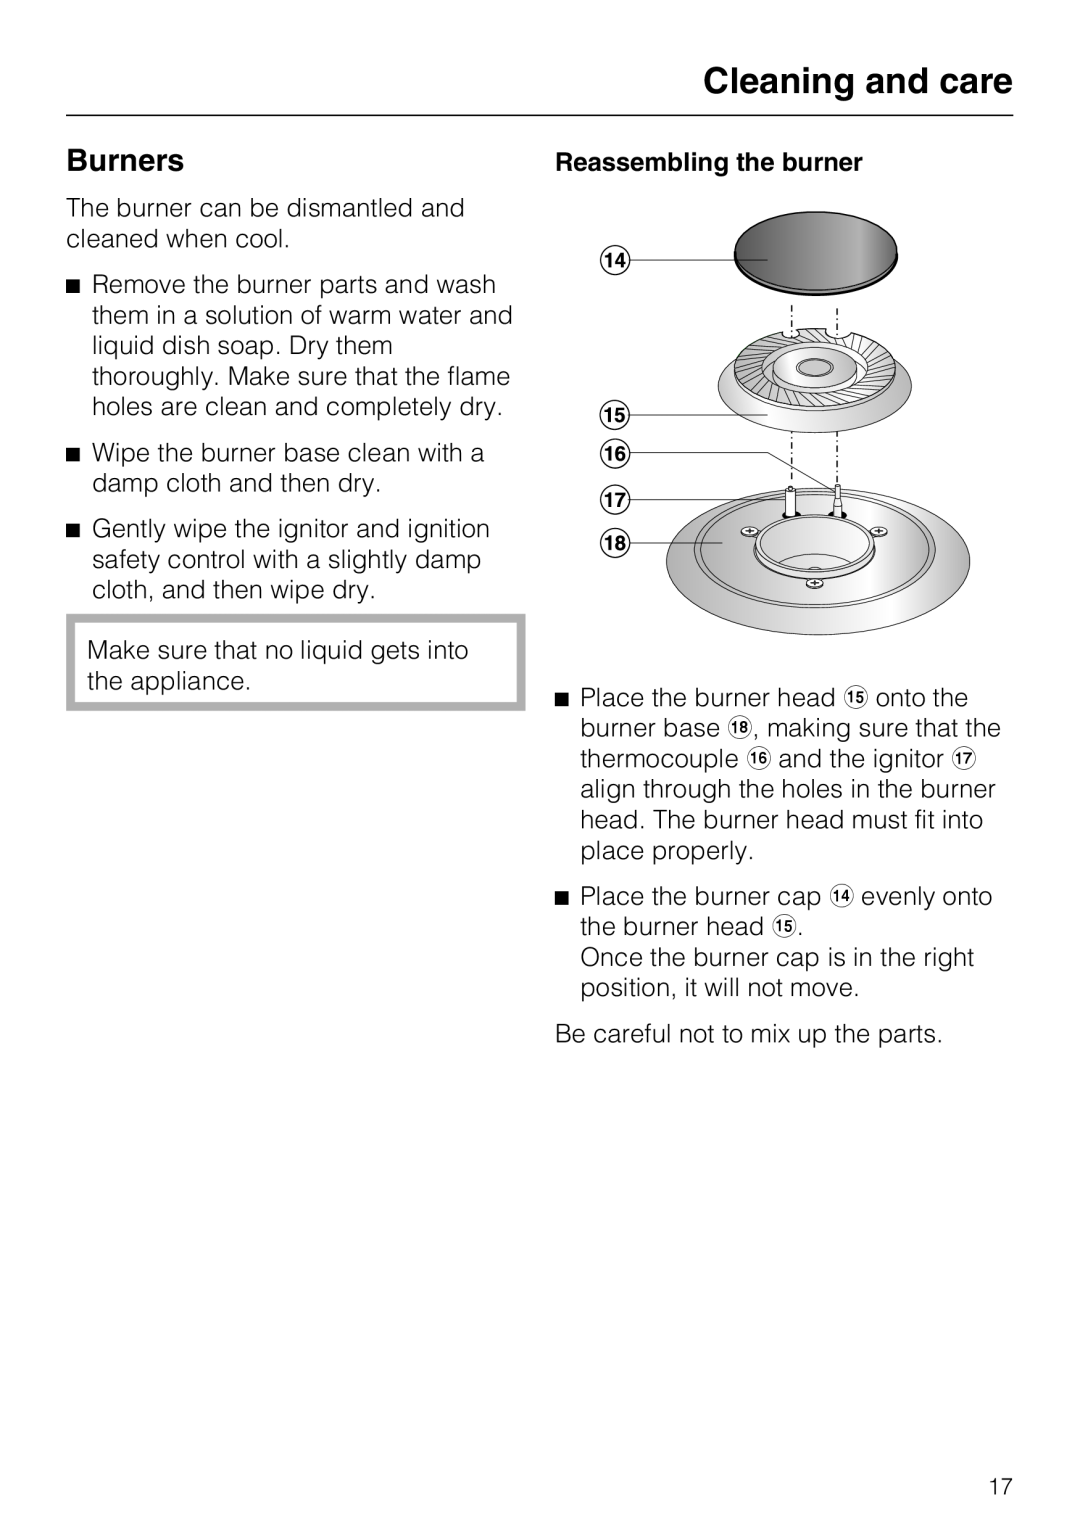 Miele CS1012 installation instructions Burners, Cleaning and care, Reassembling the burner 